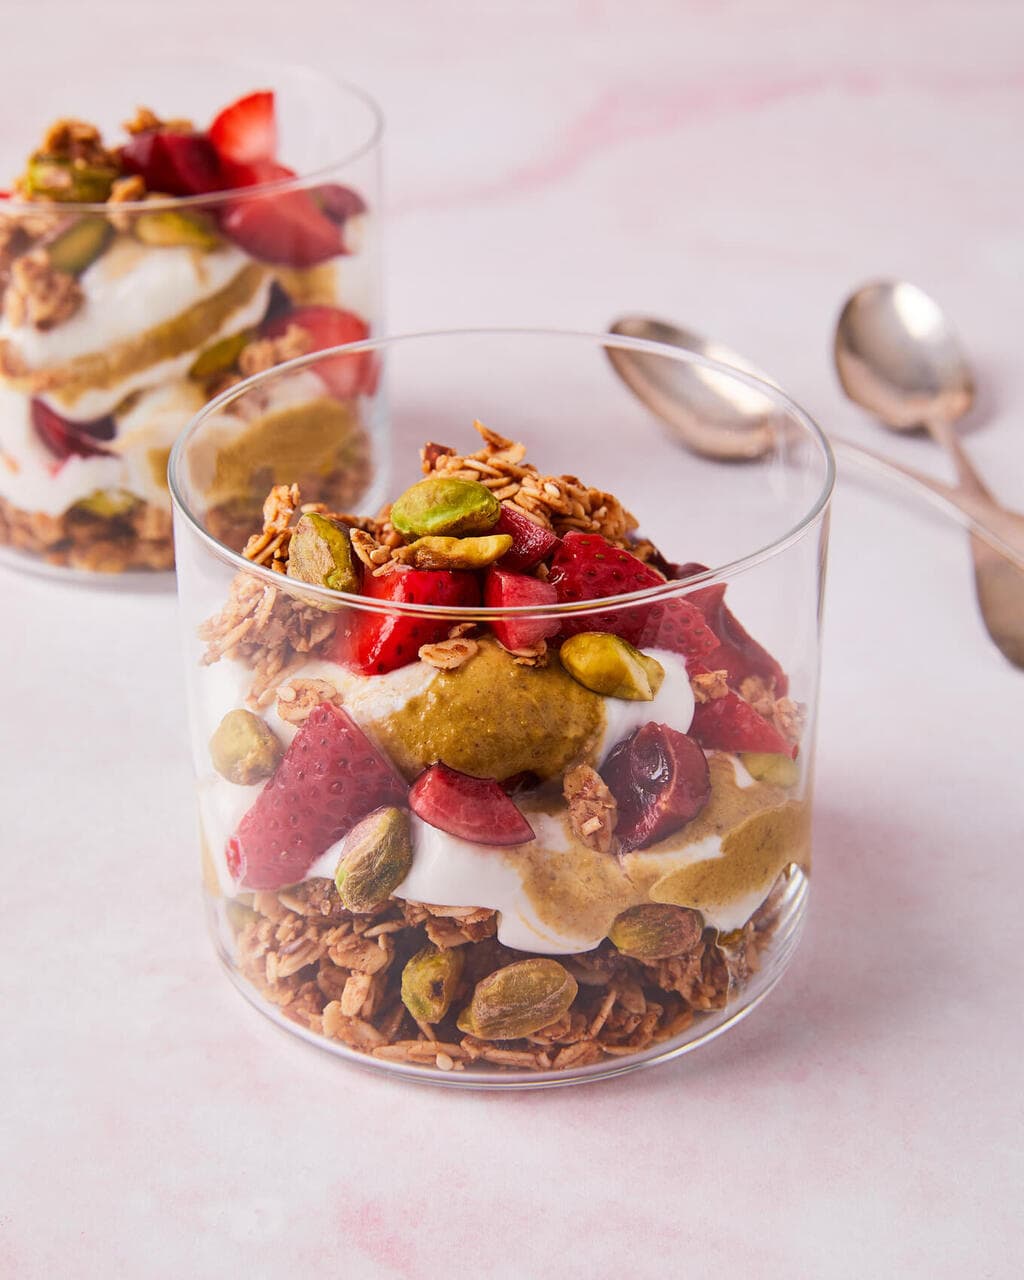 breakfast yogurt parfait with pistachio butter and red fruit